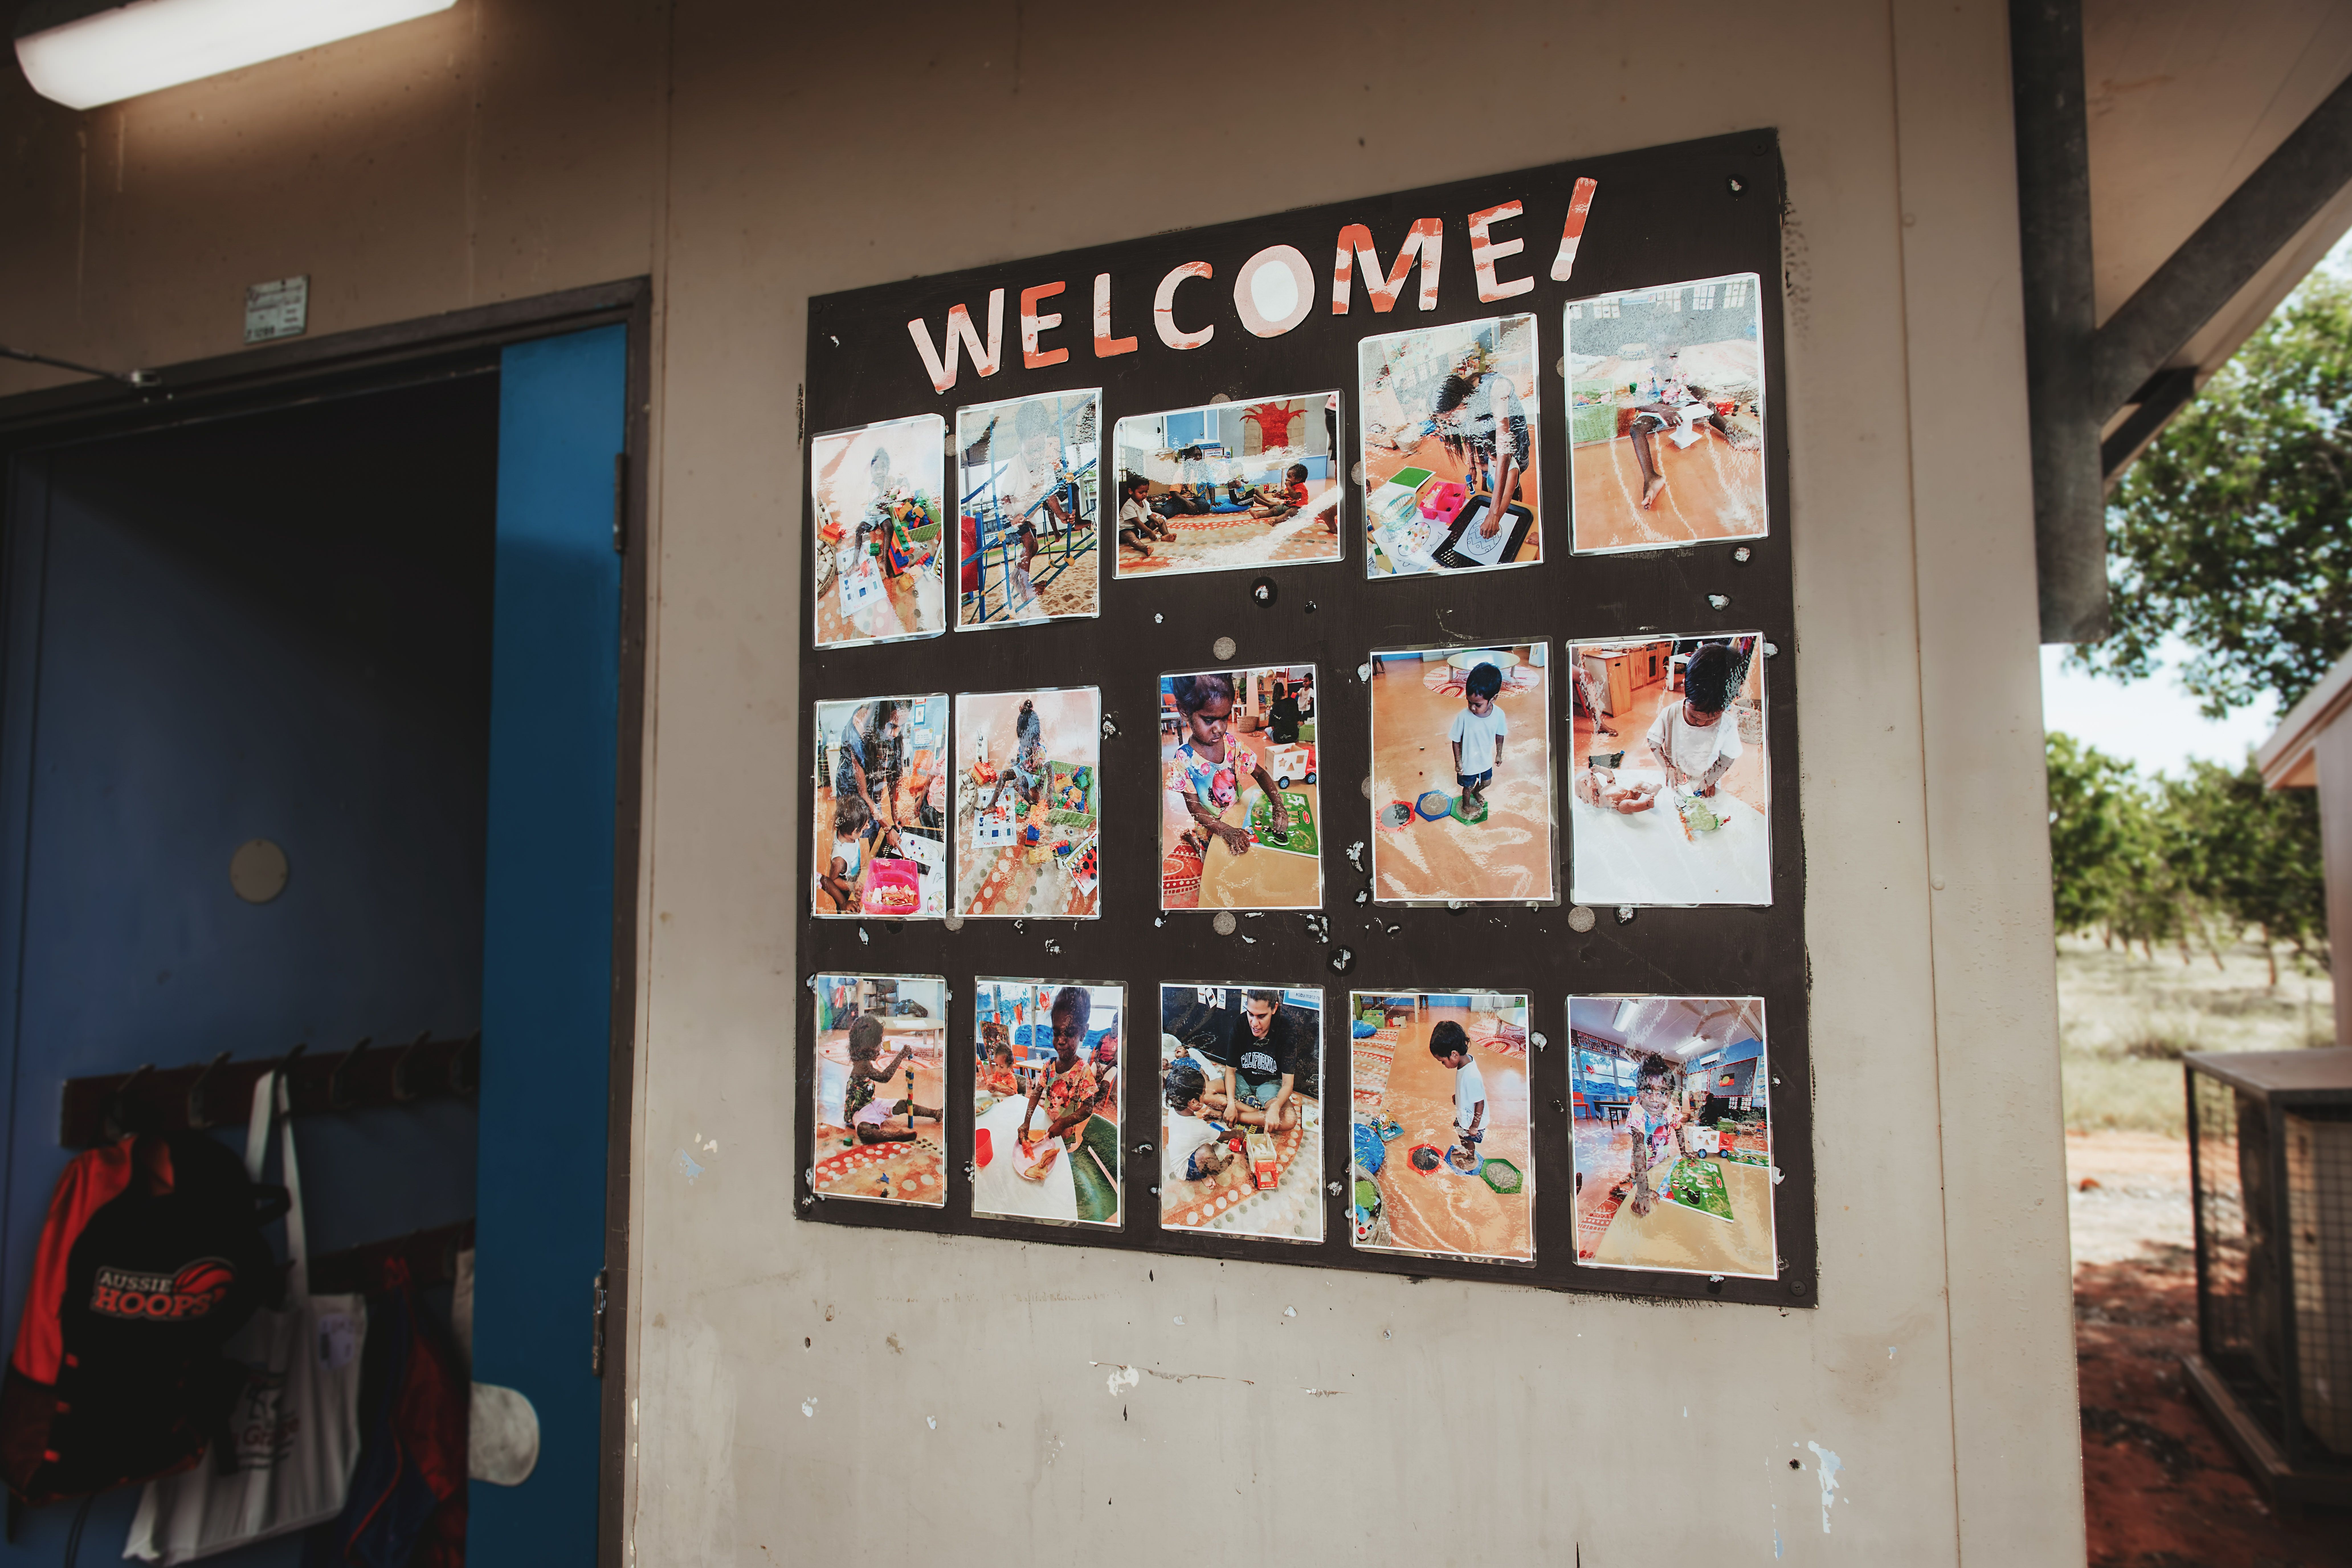 A board with 'Welcome' written across the top, displaying photos of children playing in a classroom